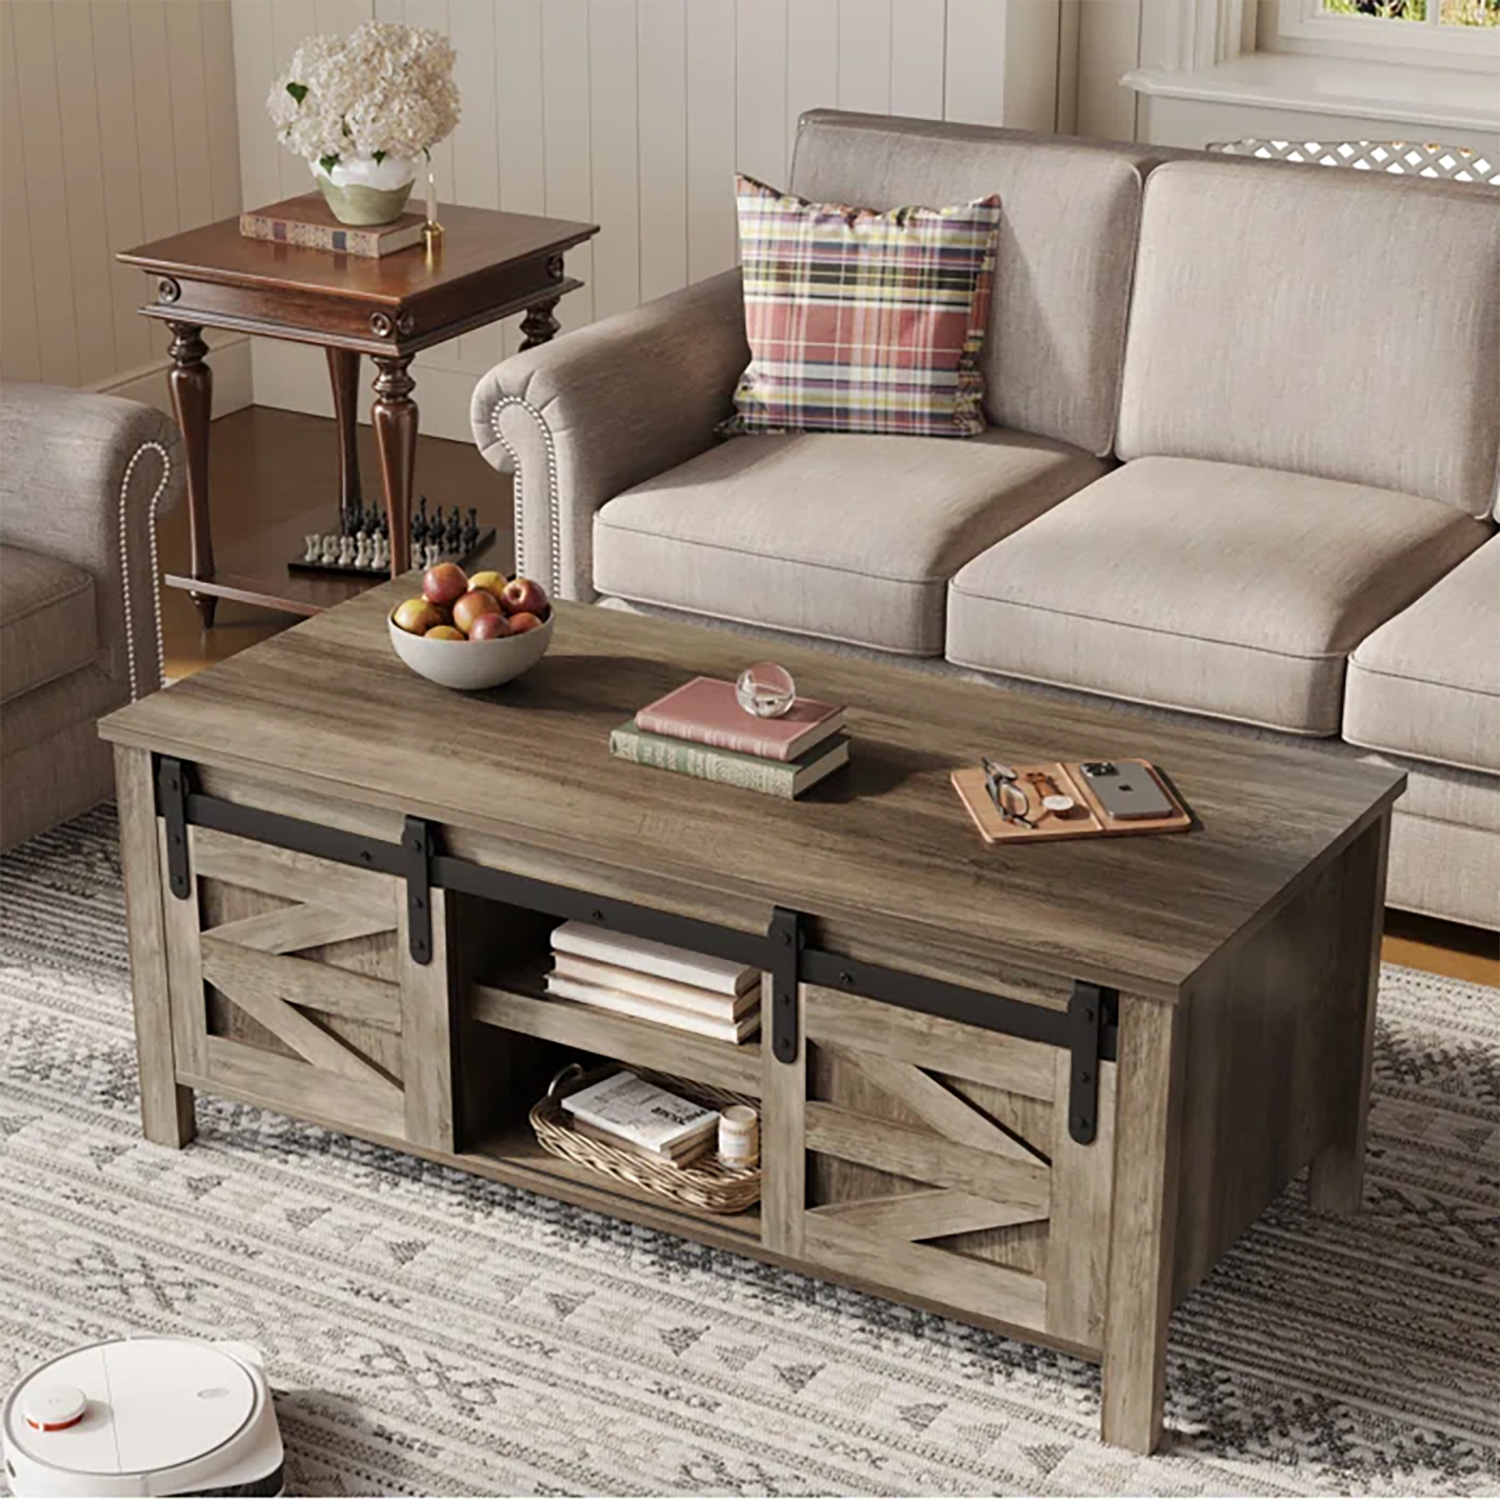 Vineego Wood Farmhouse Coffee Table With Storage In The Coffee Tables  Department At Lowes Regarding Coffee Tables With Storage And Barn Doors (View 11 of 15)